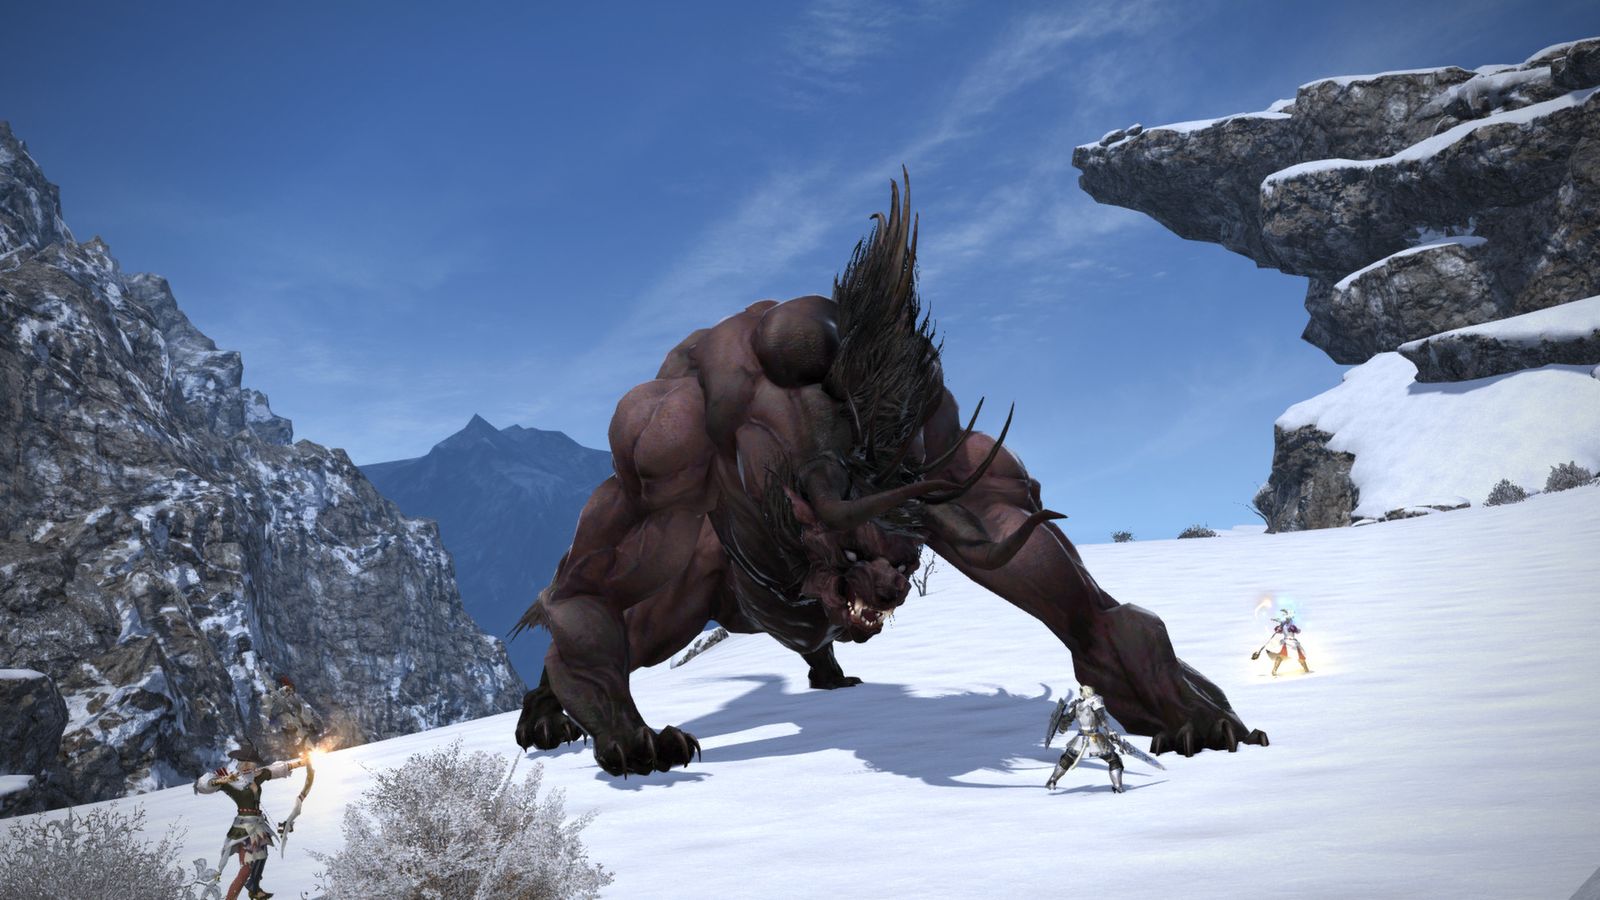 FFXIV features battles with large enemies in its end-game